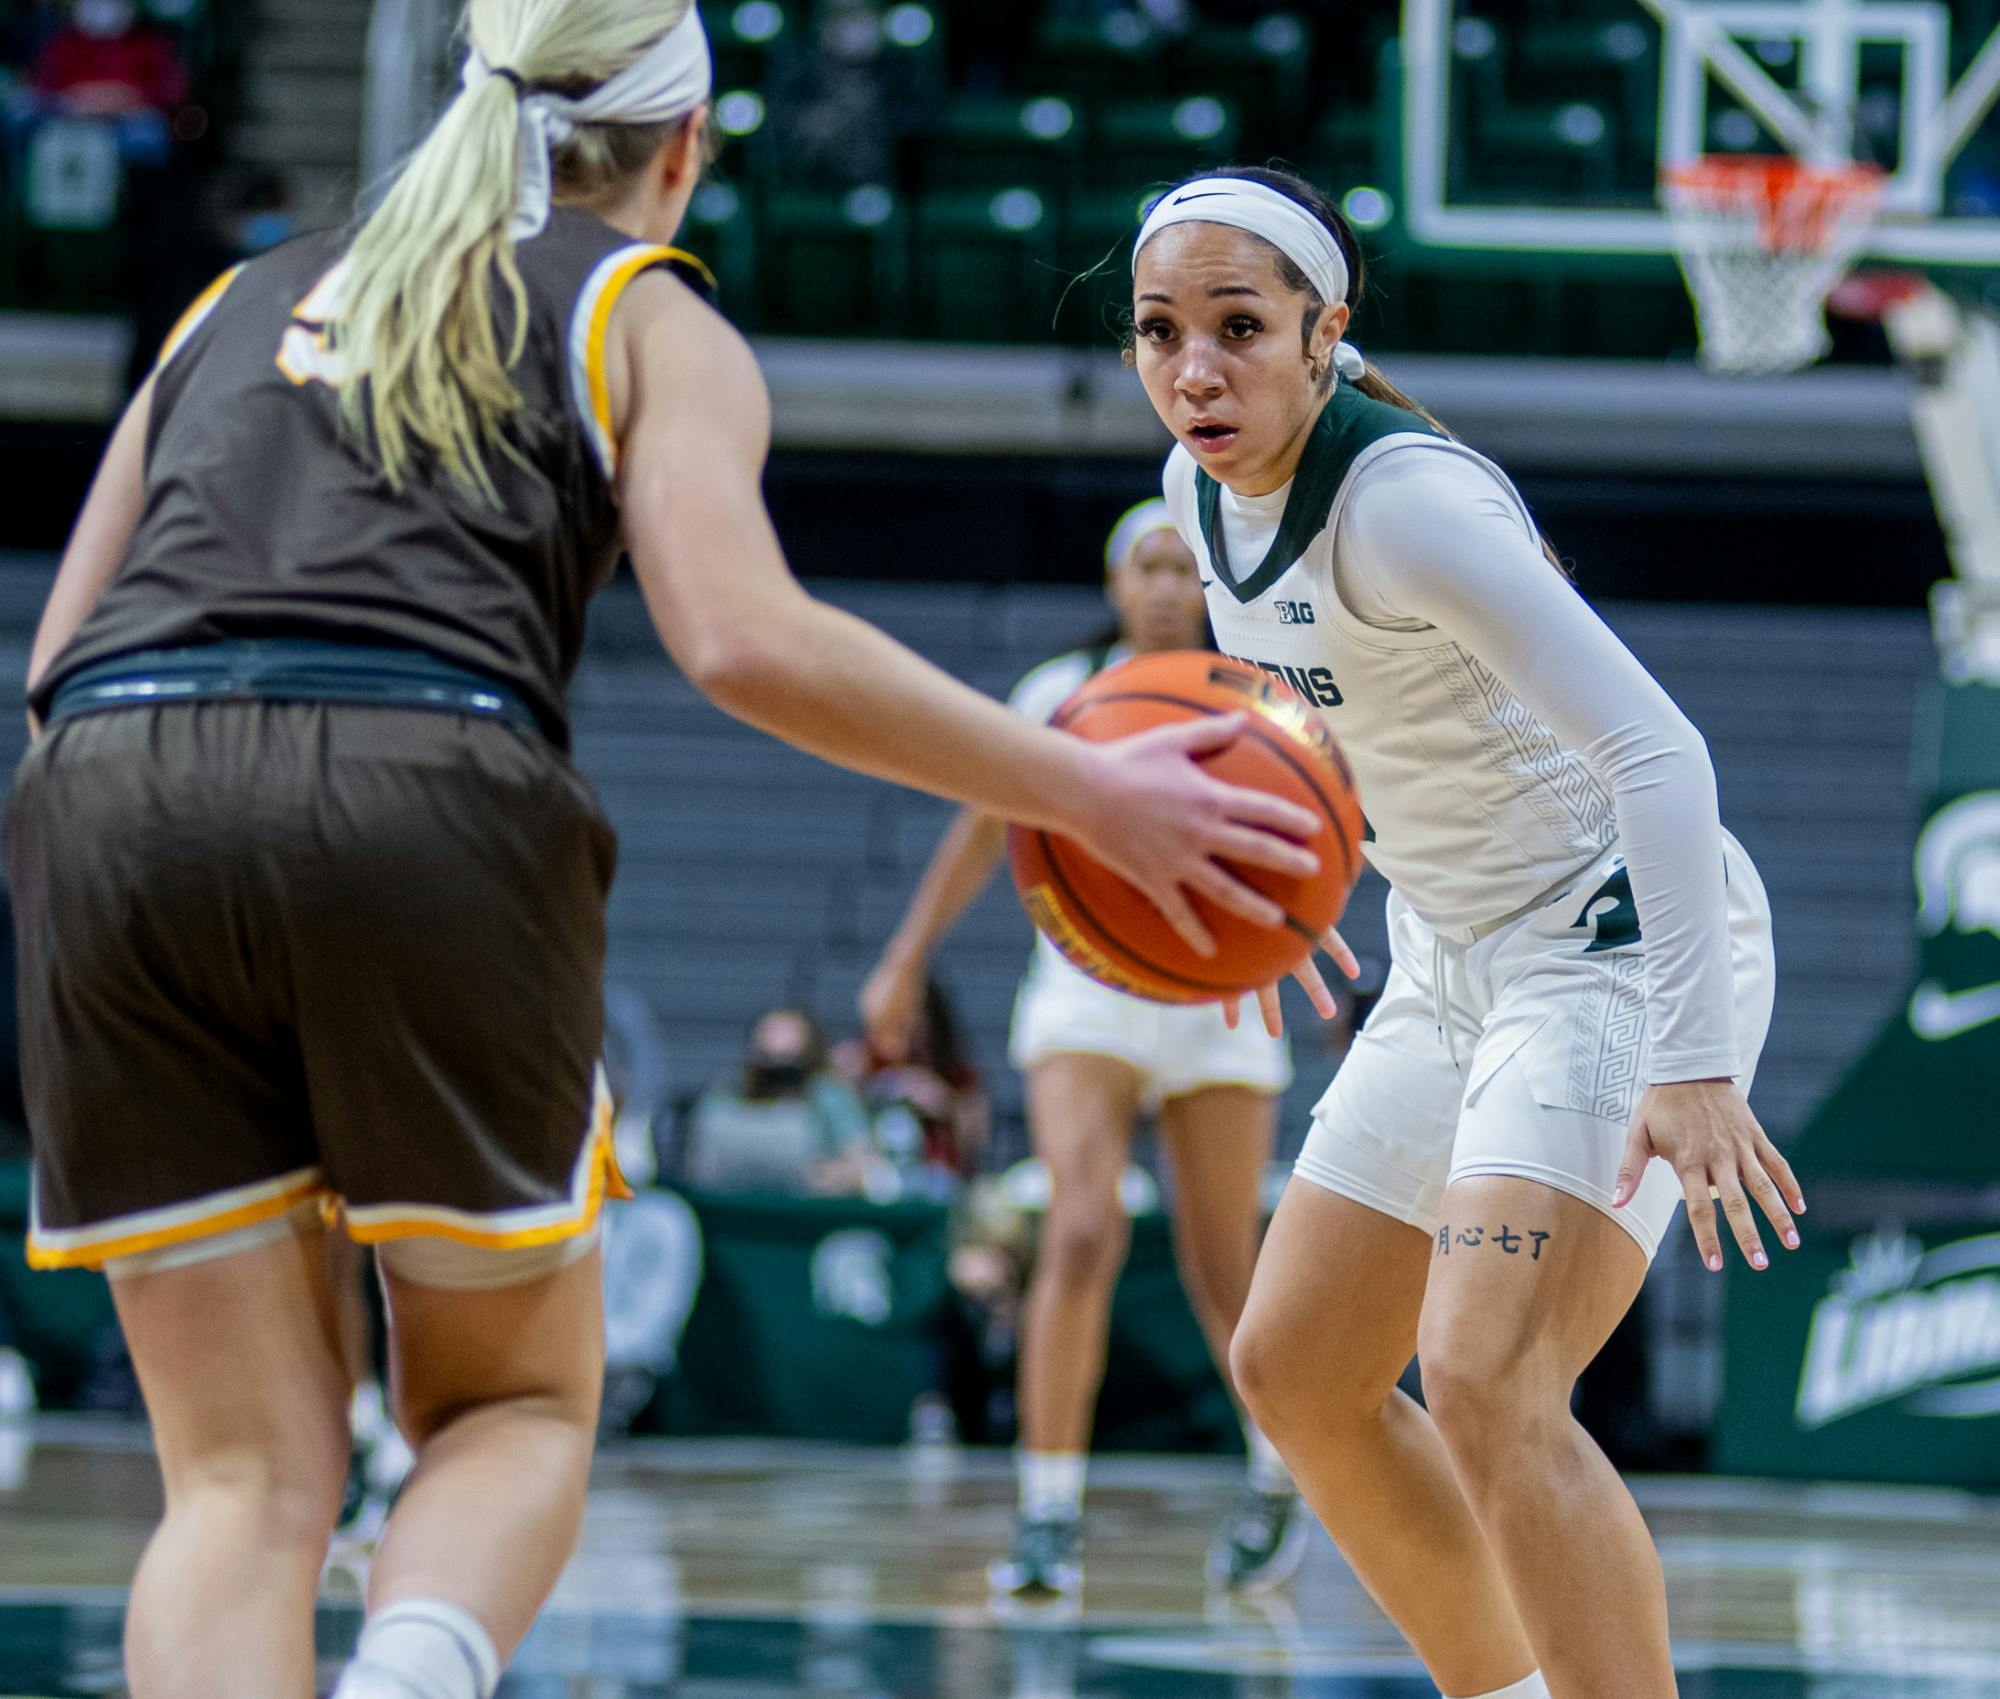 <p>Junior guard Alyza Winston watches the ball as she get back on defense, at the Breslin Center on Nov. 16, 2021. Michigan State women&#x27;s basketball took down Valparaiso 73-62, as Head Coach Suzy Merchant claimed her 500th win.</p>